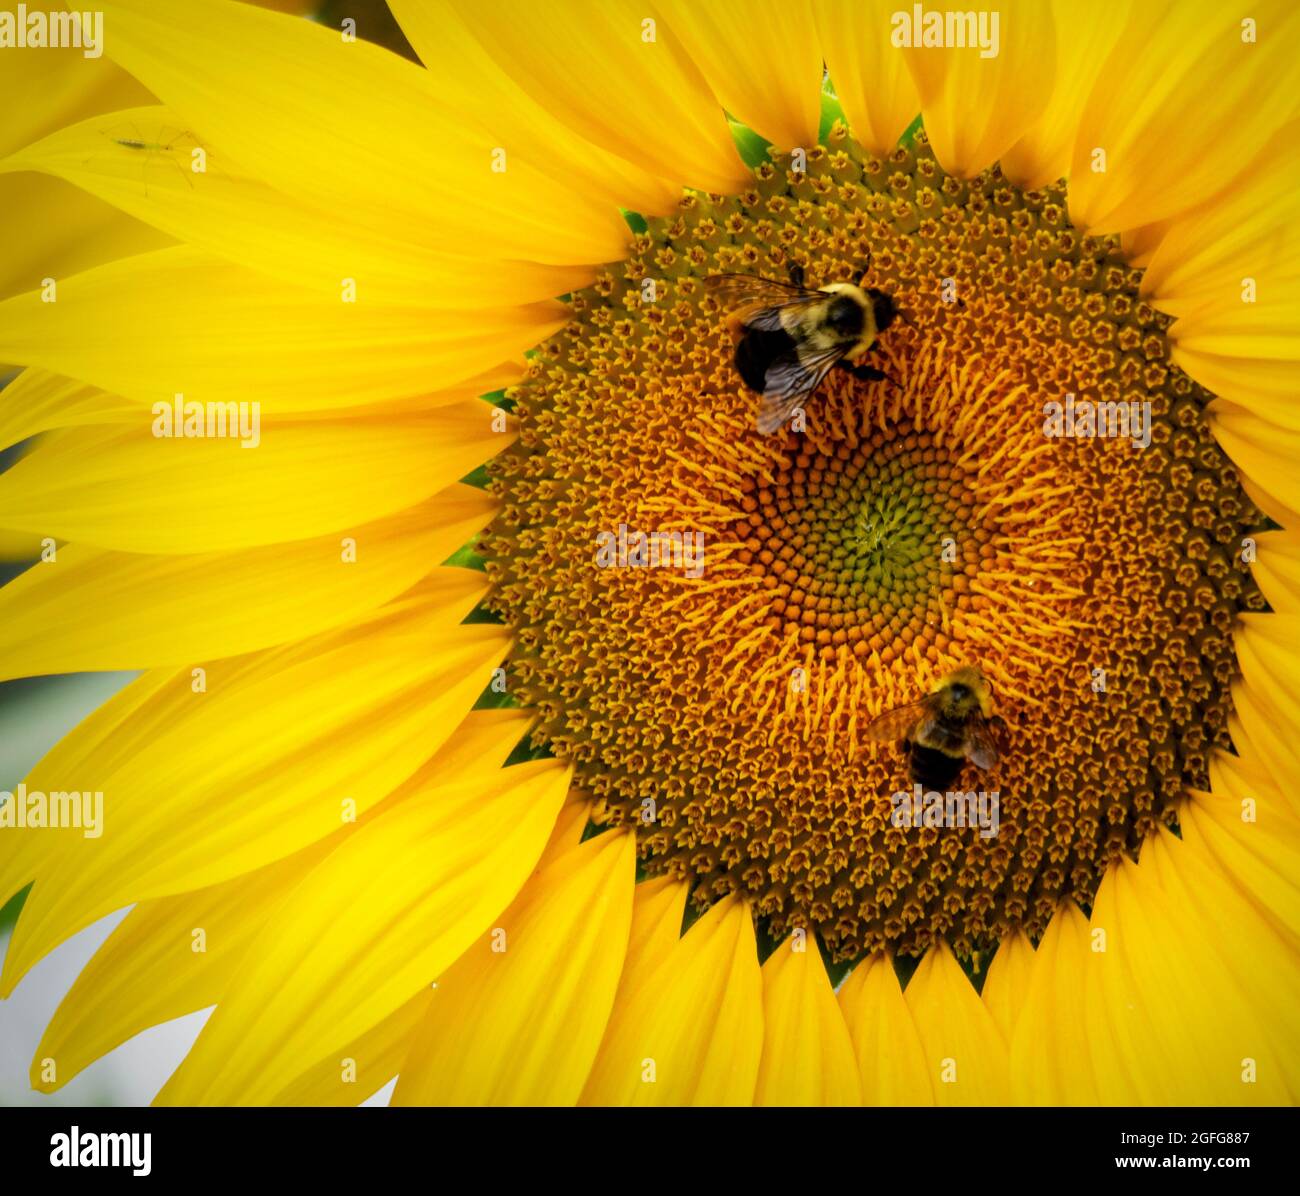 A pair of bumble bees share a sunflower. Stock Photo